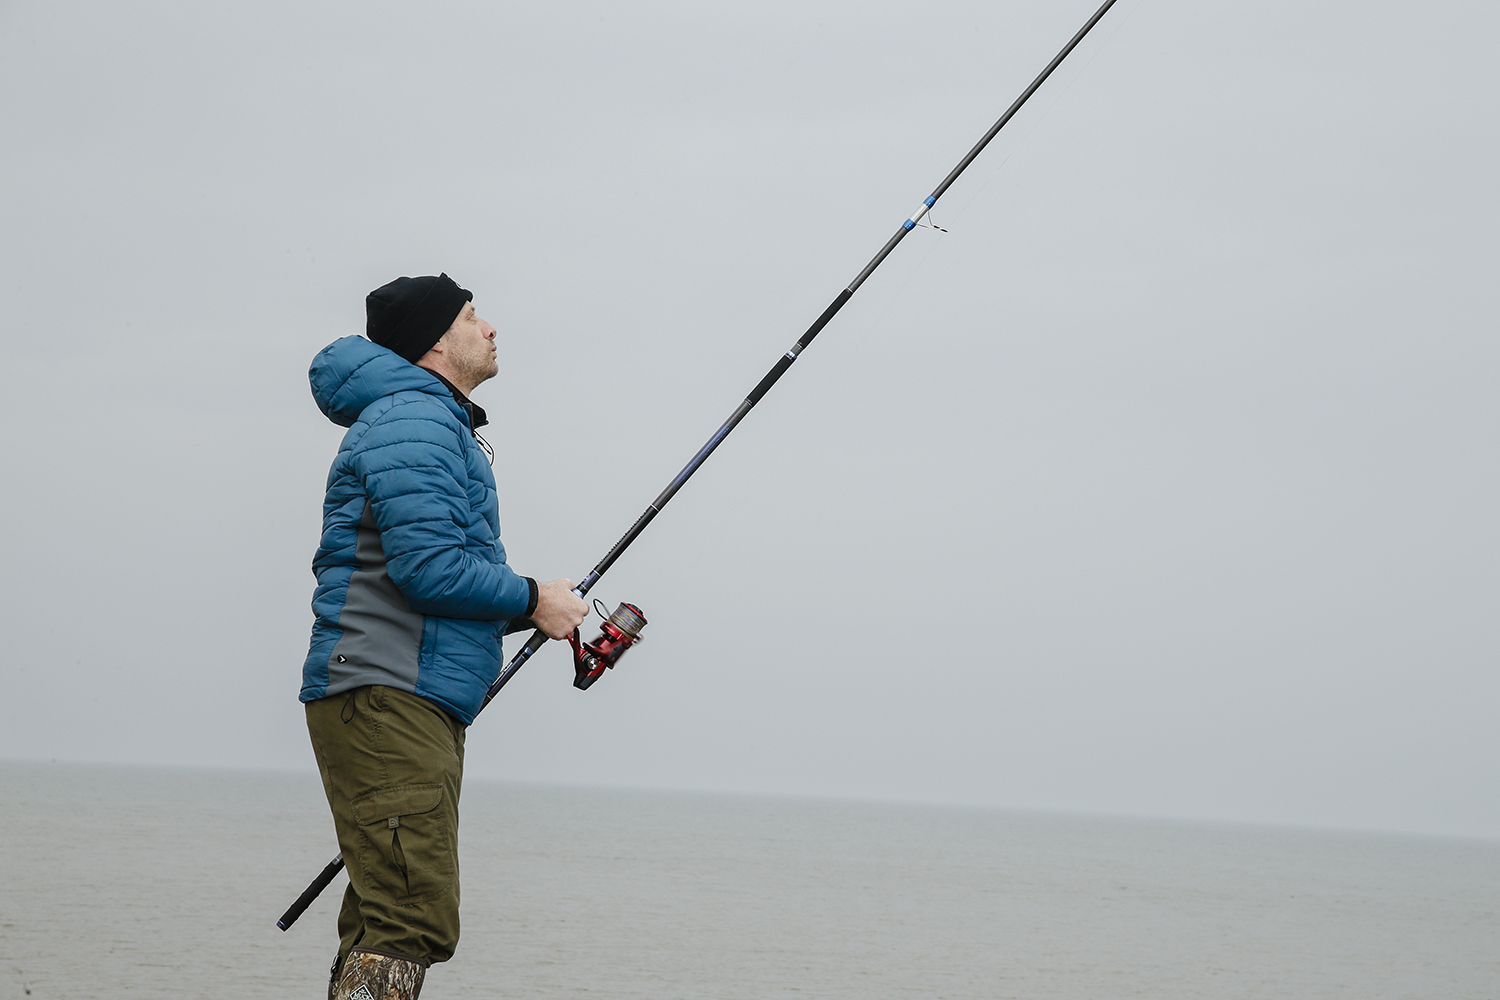 Man shore fishing with Tronixpro Competition Match GT rod